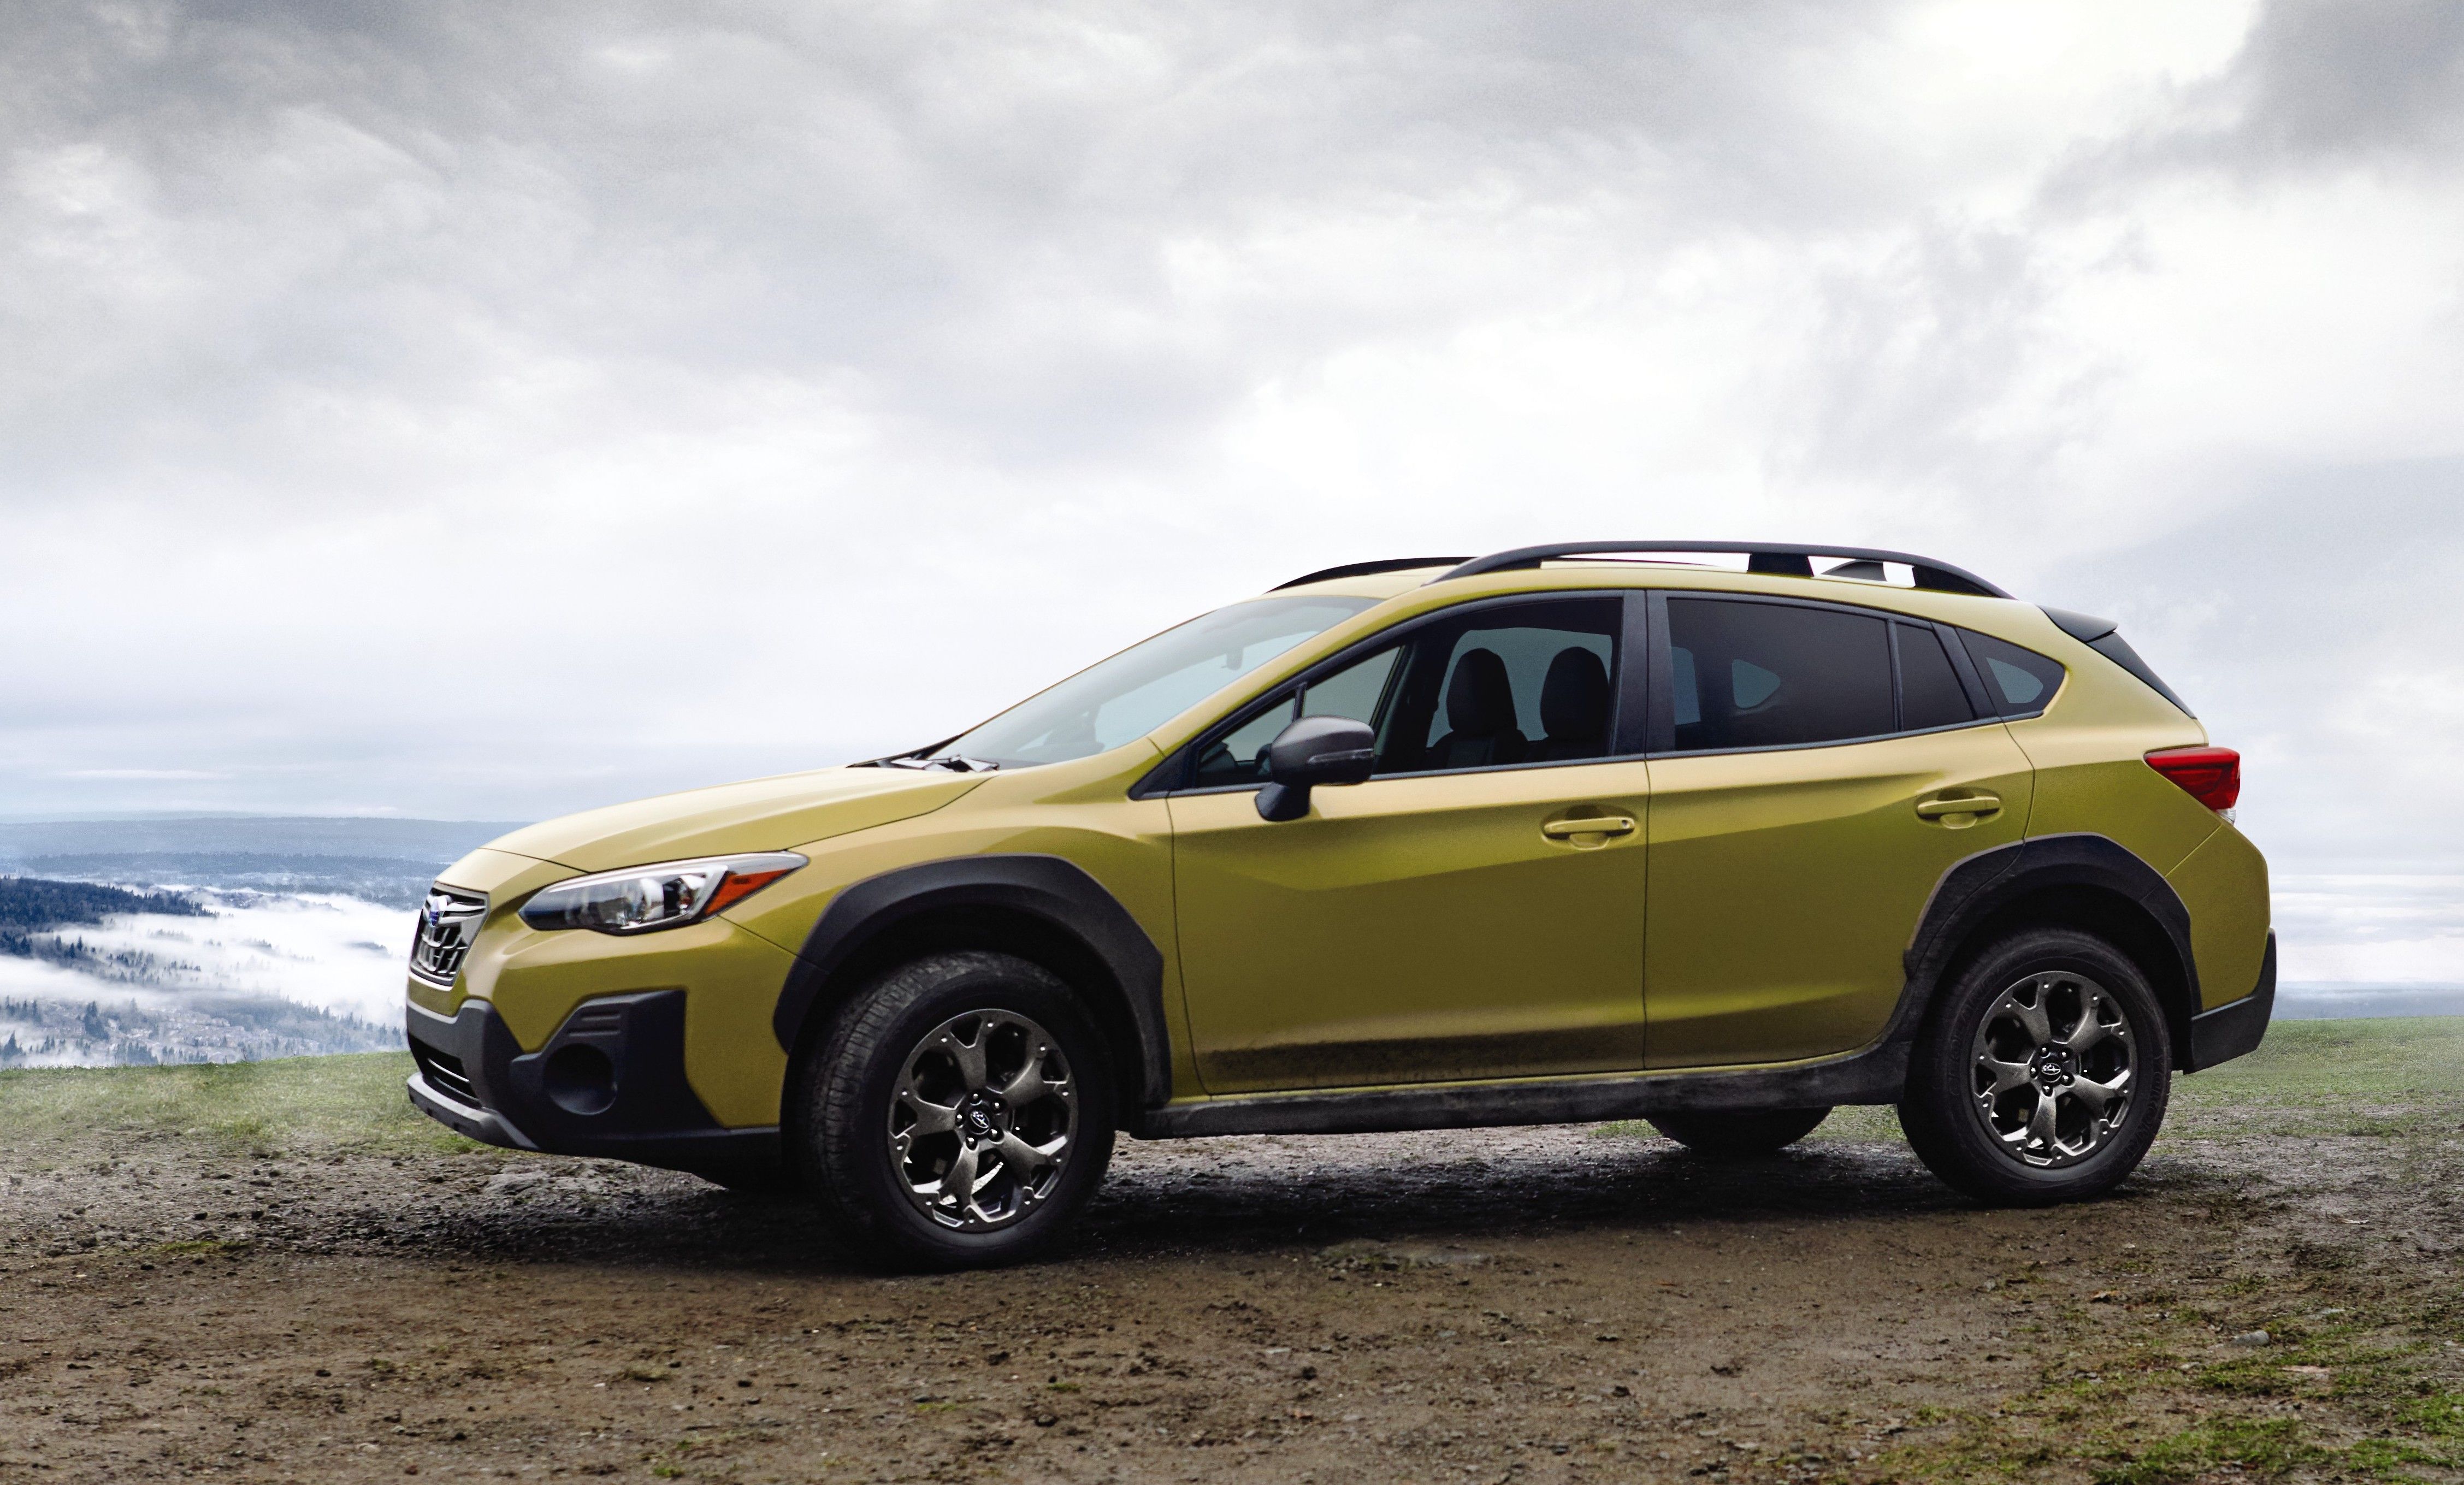 New Subaru Crosstrek Is Coming, But I Like the Old One More